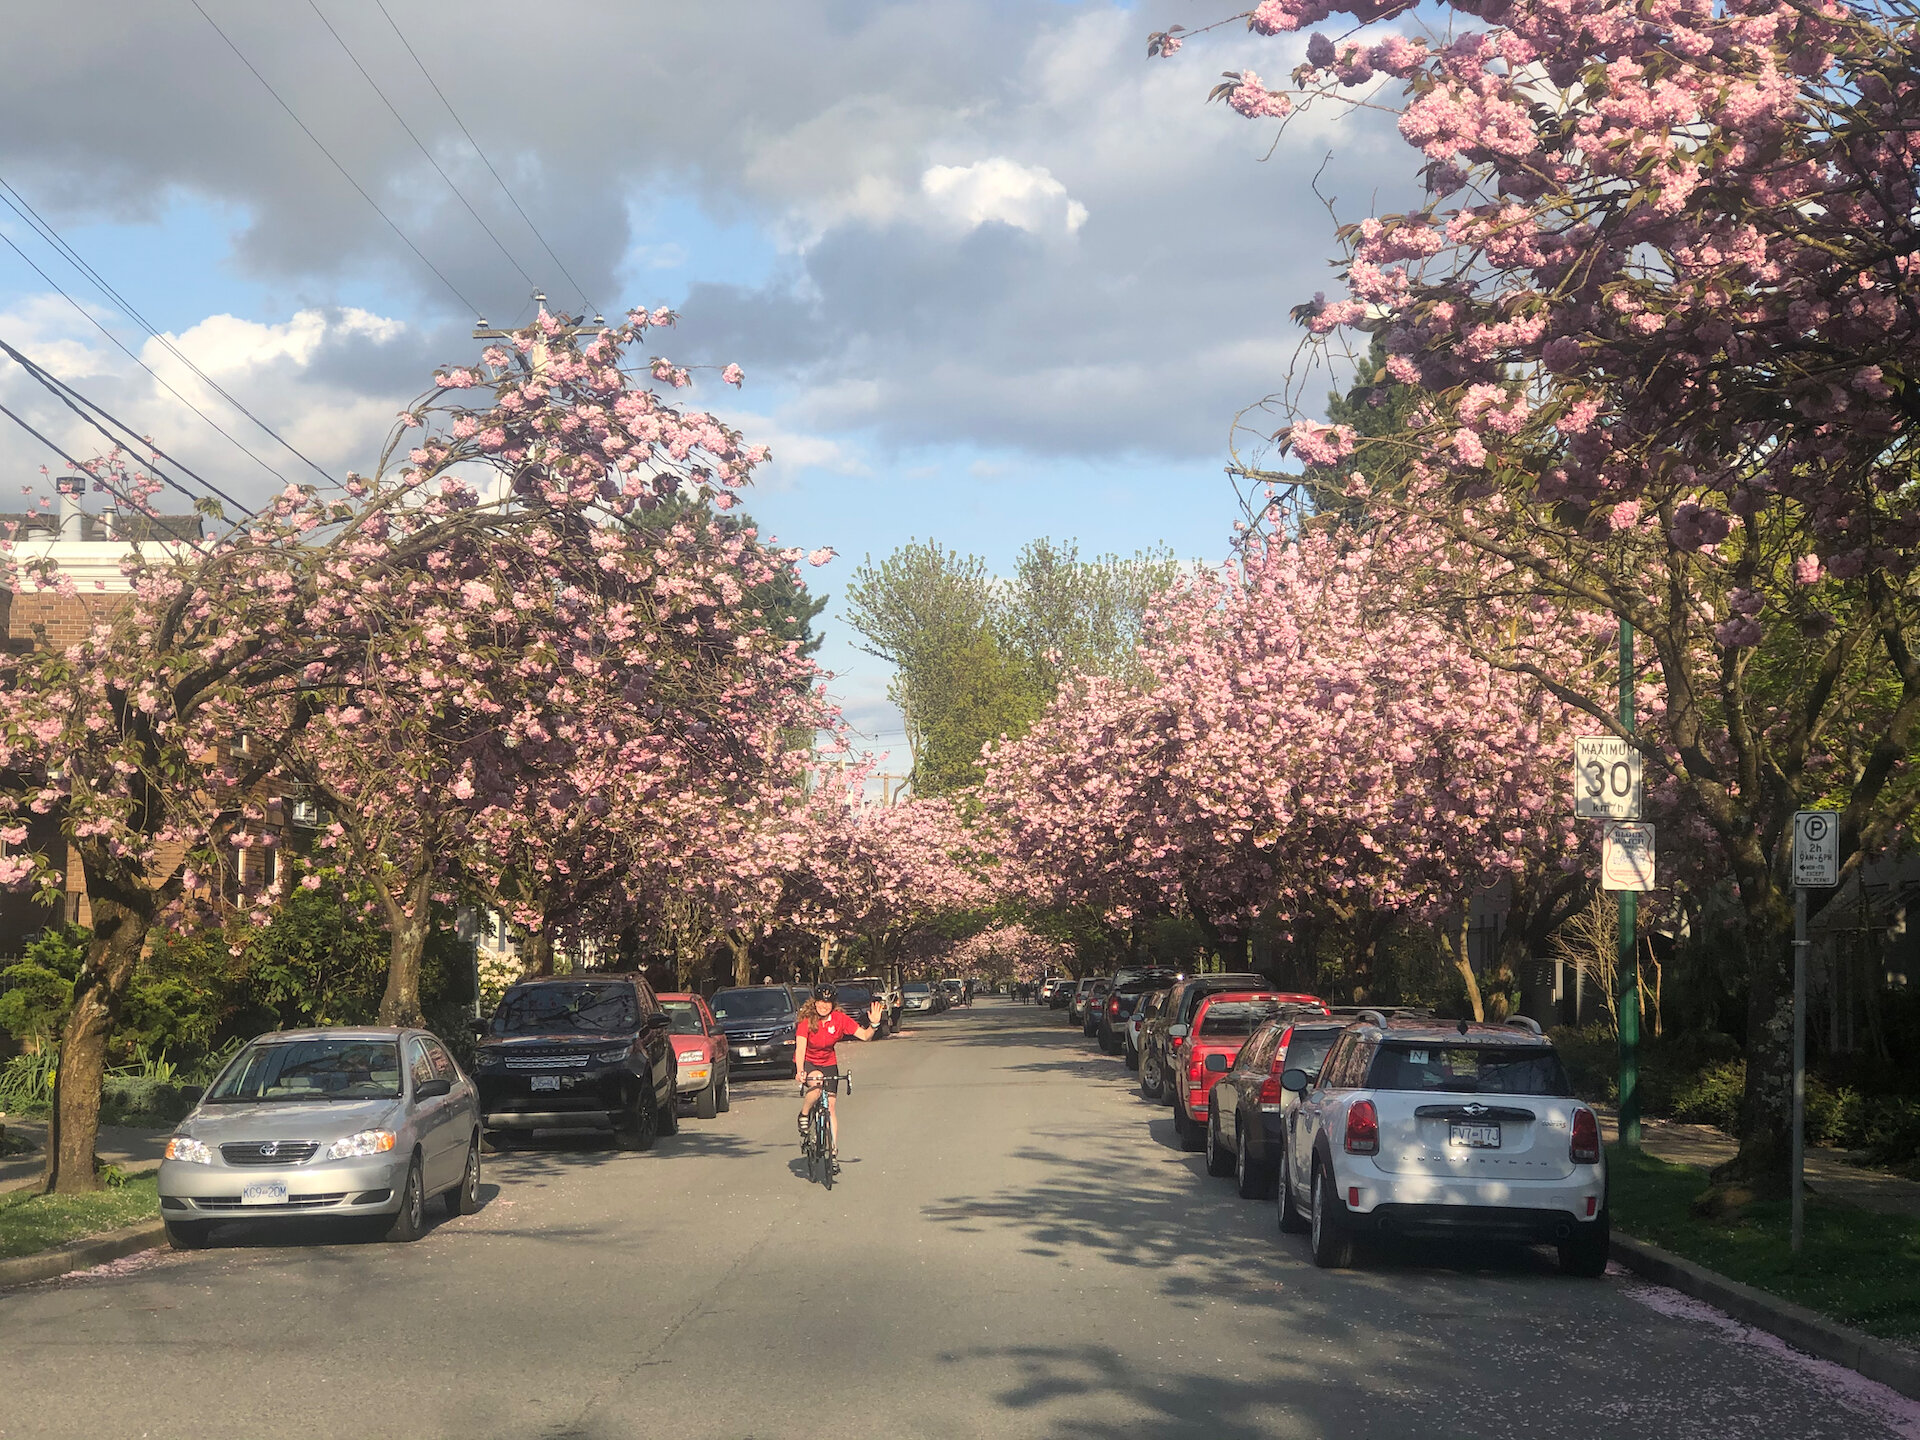  Out for a ride with Justine, coming back along 7th shows the cherries in full bloom. 